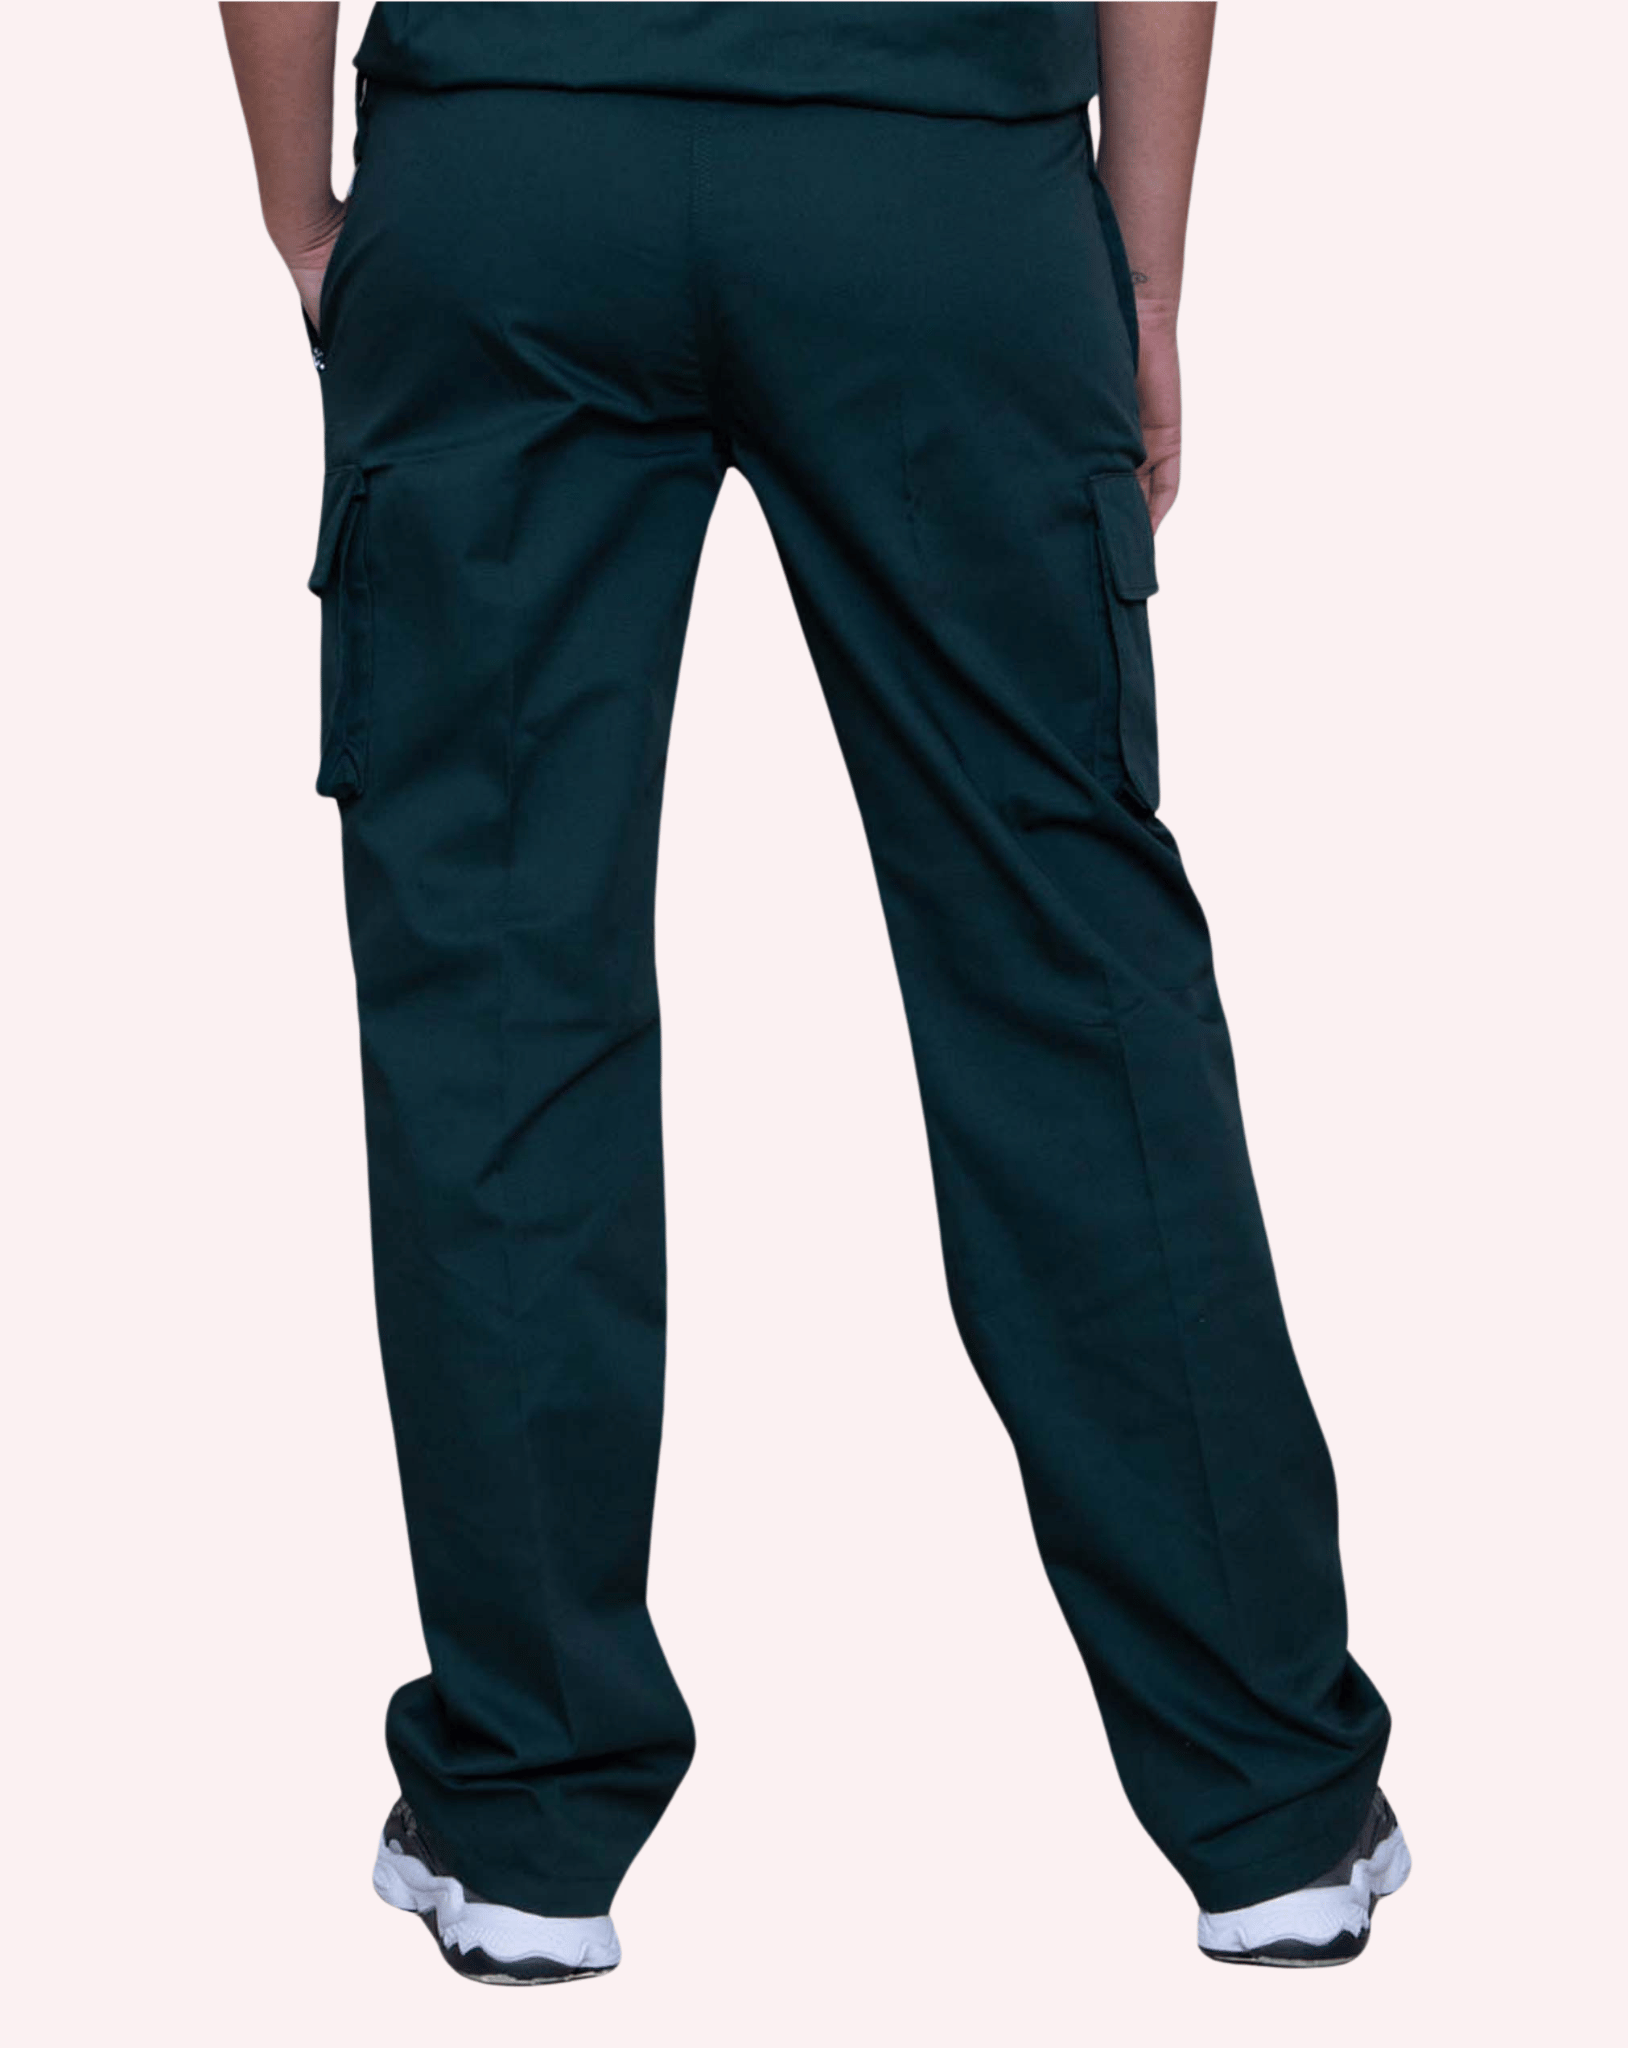 Green Ambulance Trousers - Ladies | Sugdens | Corporate Clothing, Uniforms  and Workwear